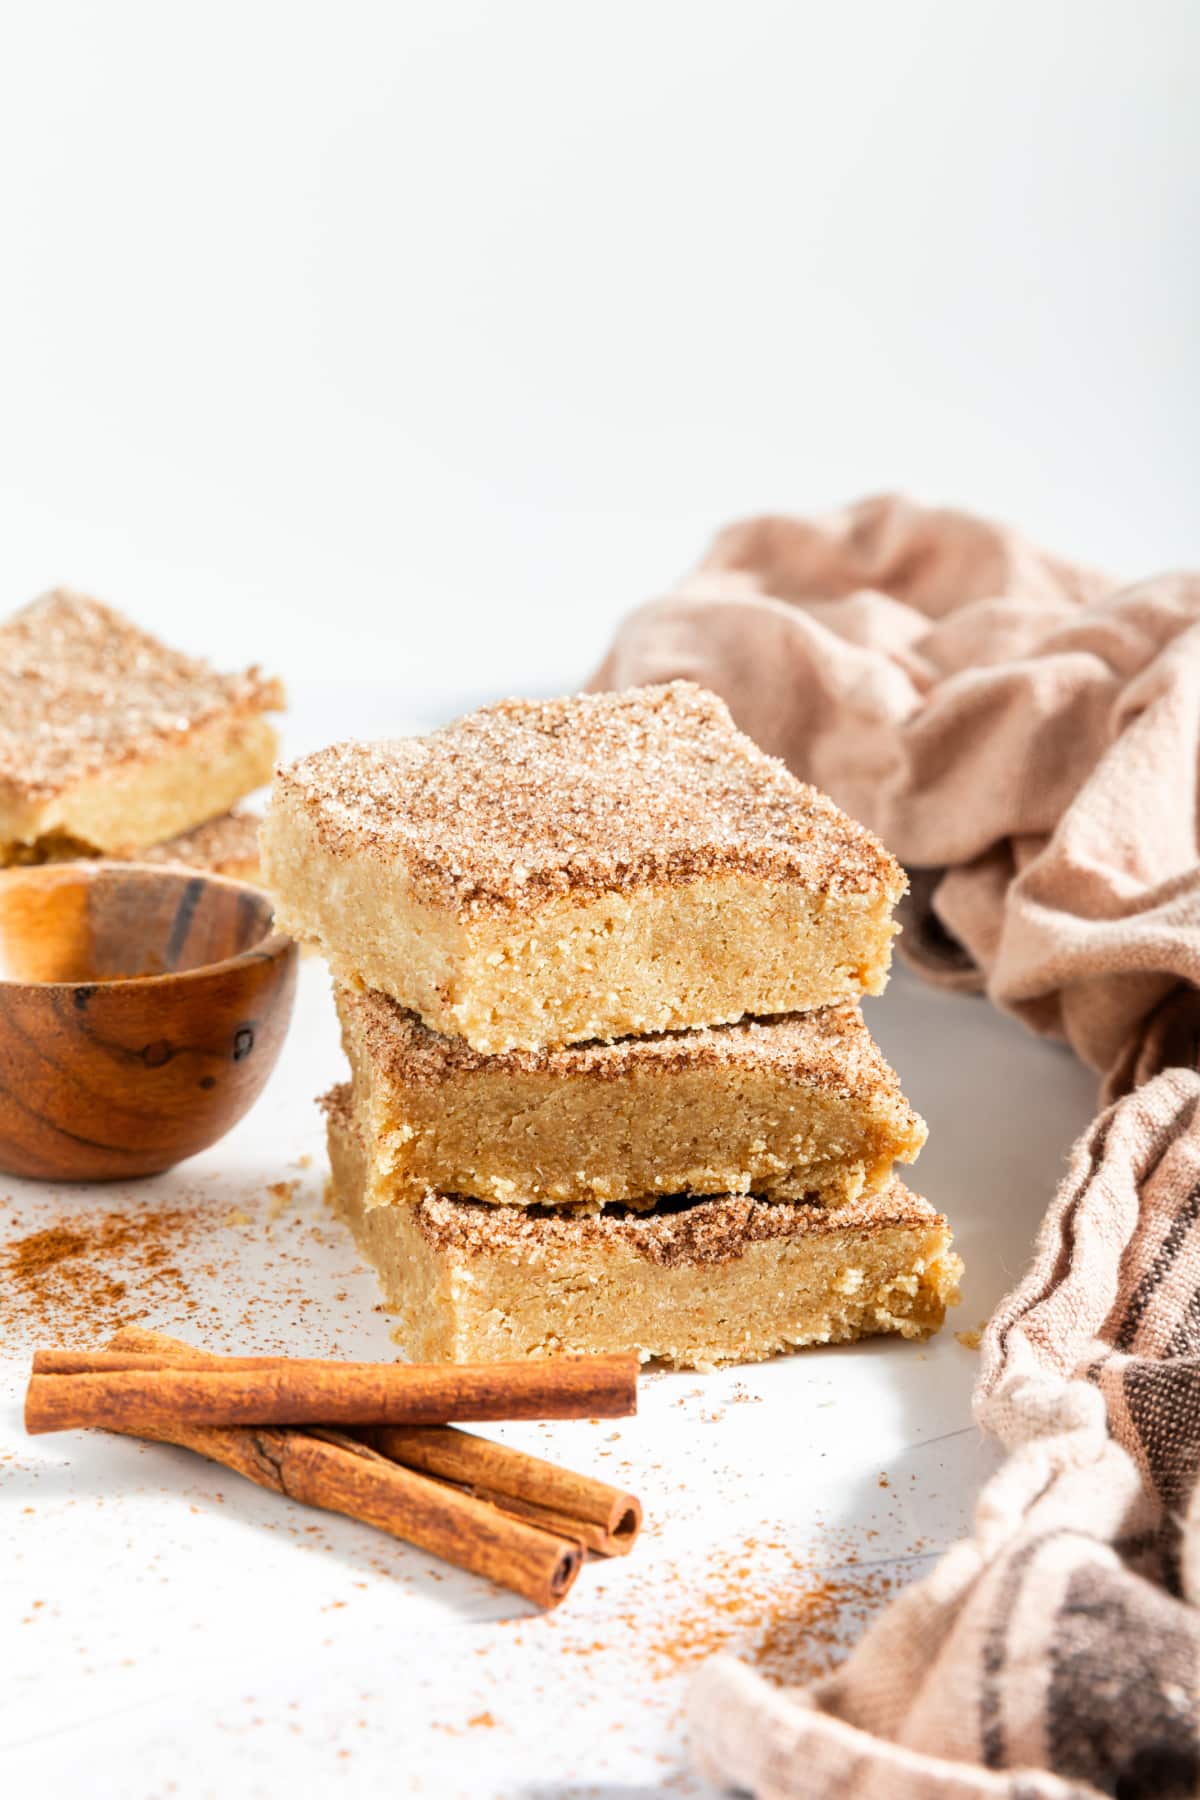 Three squares of snickerdoodle blondies stacked on top of each other. Blondies are topped with a cinnamon sugar mixture, and sit next to a small wooden bowl of cinnamon sugar and cinnamon sticks. A beige cloth napkin is crumpled next to the cookie bar stack.